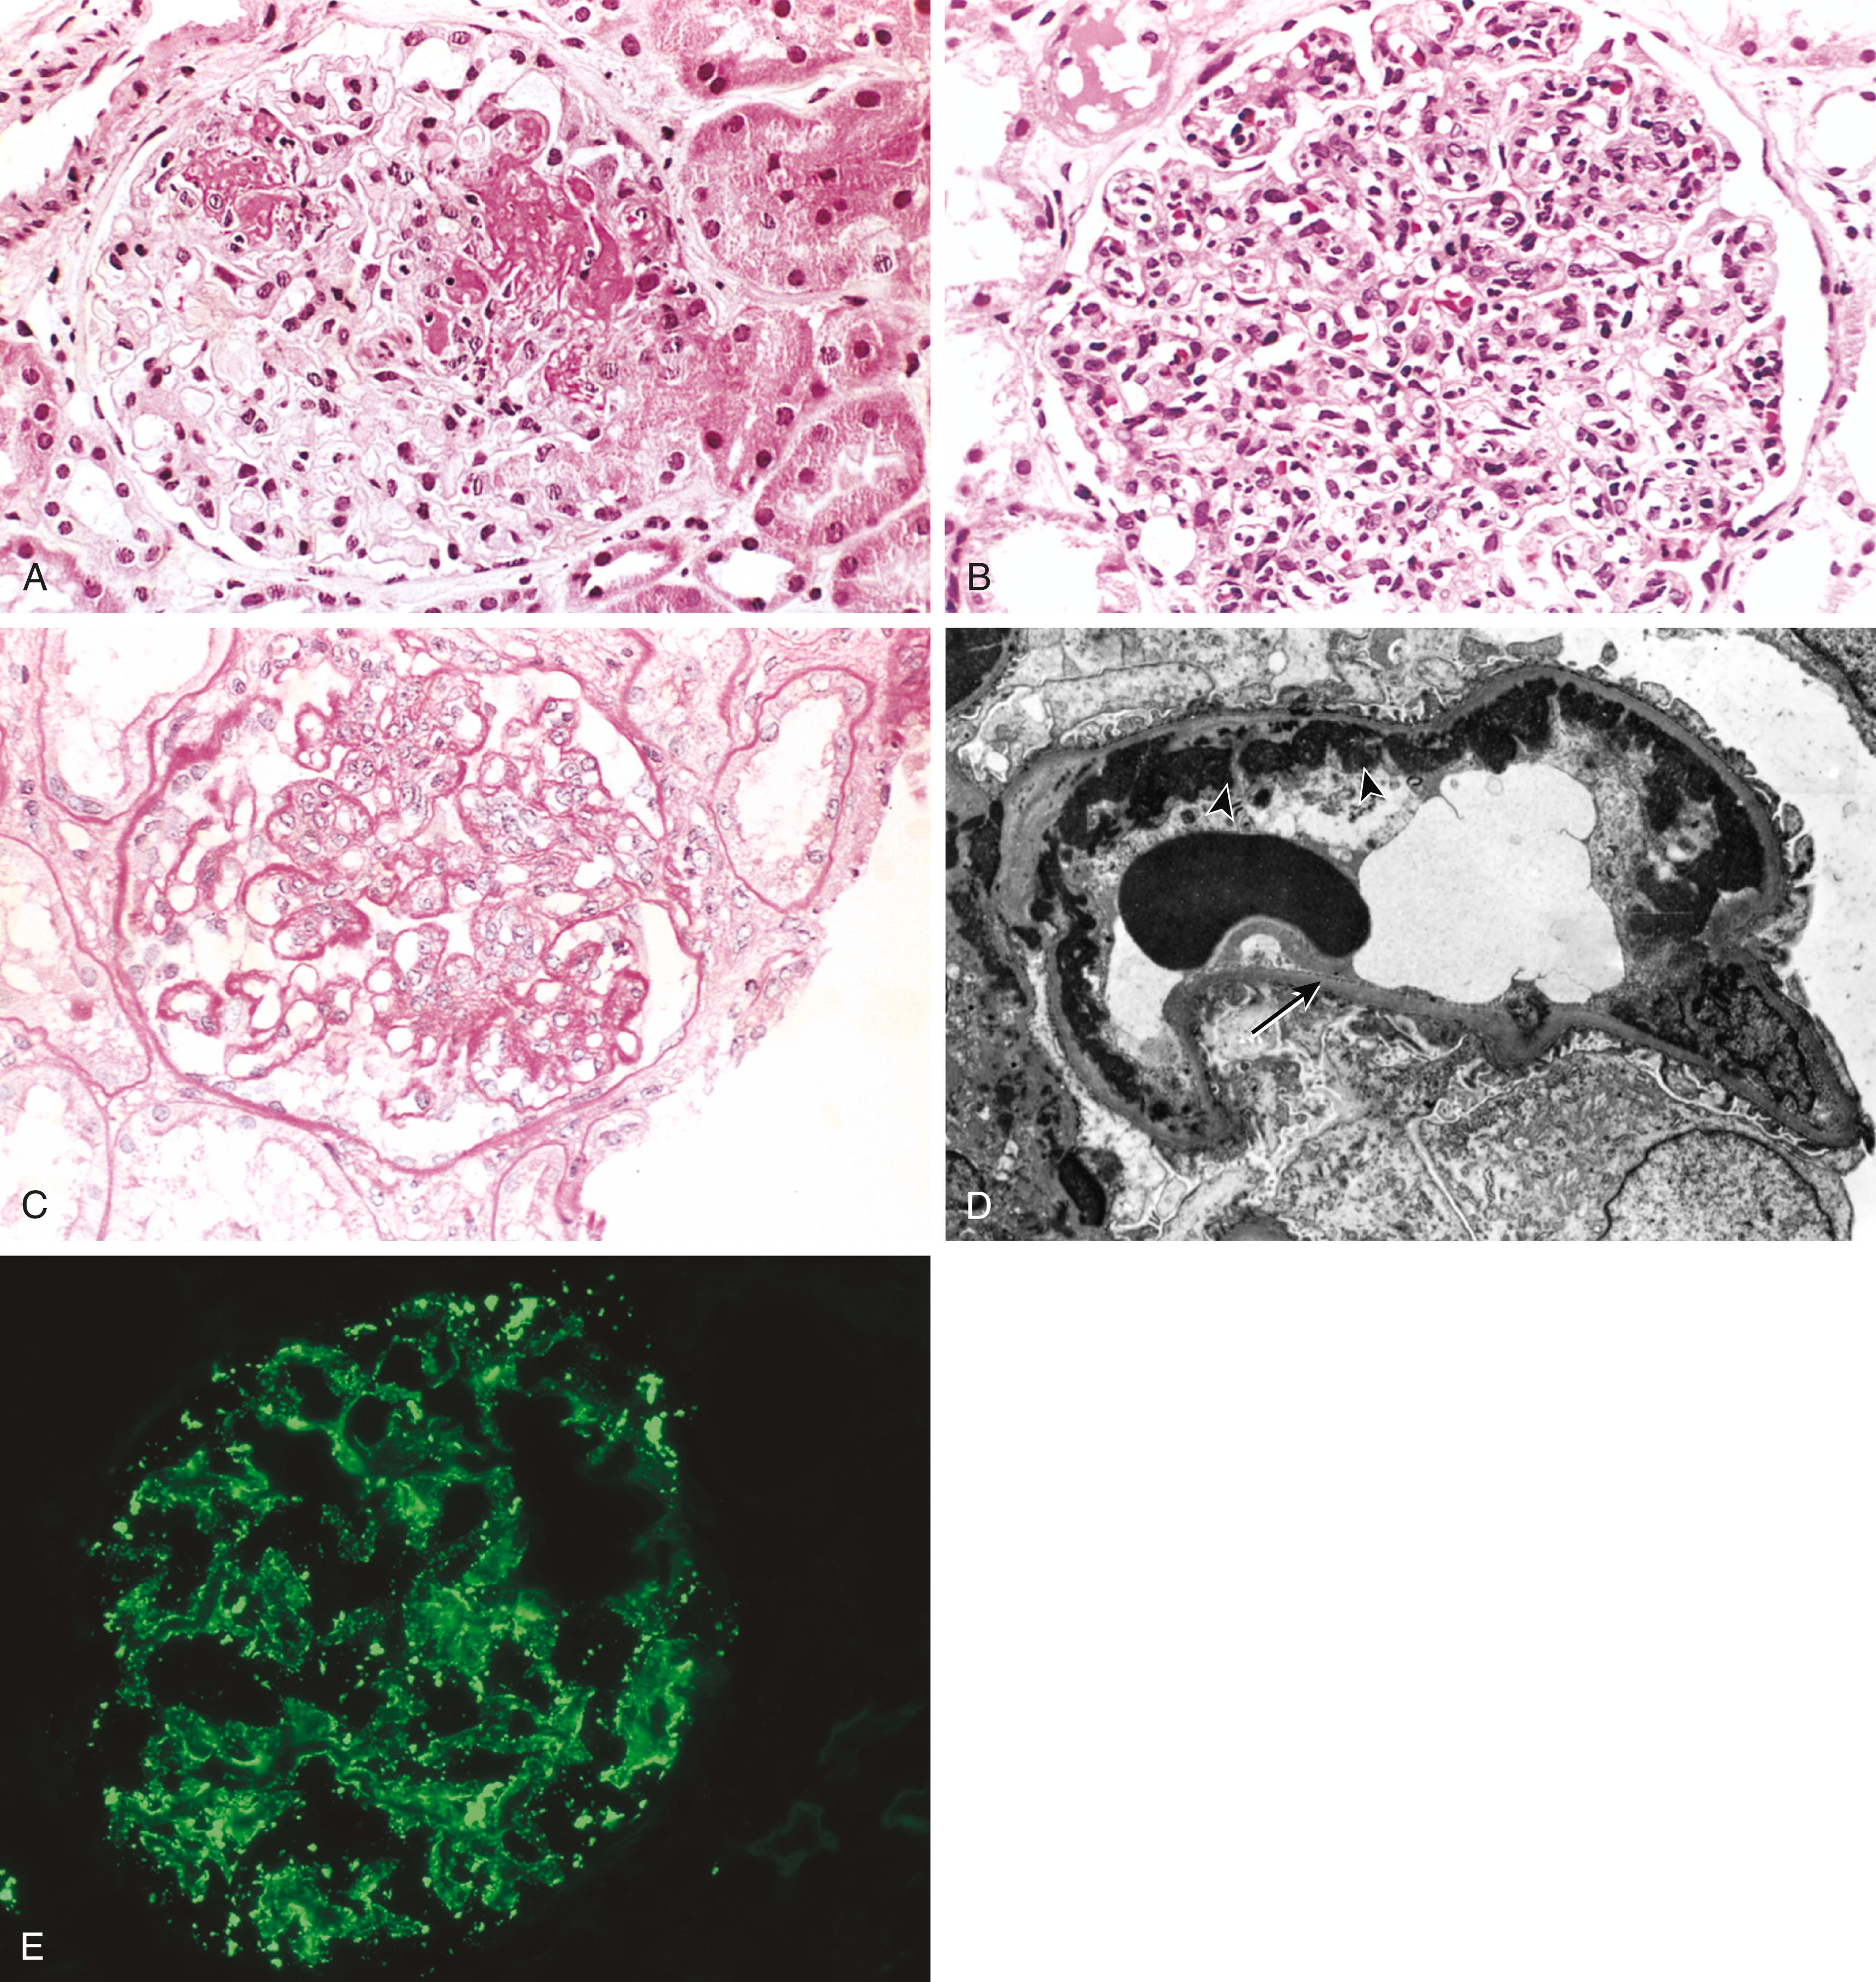 FIG. 12.11, Lupus nephritis. (A) Focal proliferative glomerulonephritis, with two focal necrotizing lesions at the 11 o’clock and 2 o’clock positions (H&E stain). Extracapillary proliferation is not prominent in this case. (B) Diffuse proliferative glomerulonephritis. Note the marked increase in cellularity throughout the glomerulus (H&E stain). (C) Lupus nephritis showing a glomerulus with several “wire-loop” lesions representing extensive subendothelial deposits of immune complexes (PAS stain). (D) Electron micrograph of a renal glomerular capillary loop shows subendothelial dense deposits (arrowhead) on basement membrane (arrow) that correspond to “wire loops” seen by light microscopy. (E) Deposition of IgG antibody in a granular pattern, detected by immunofluorescence.